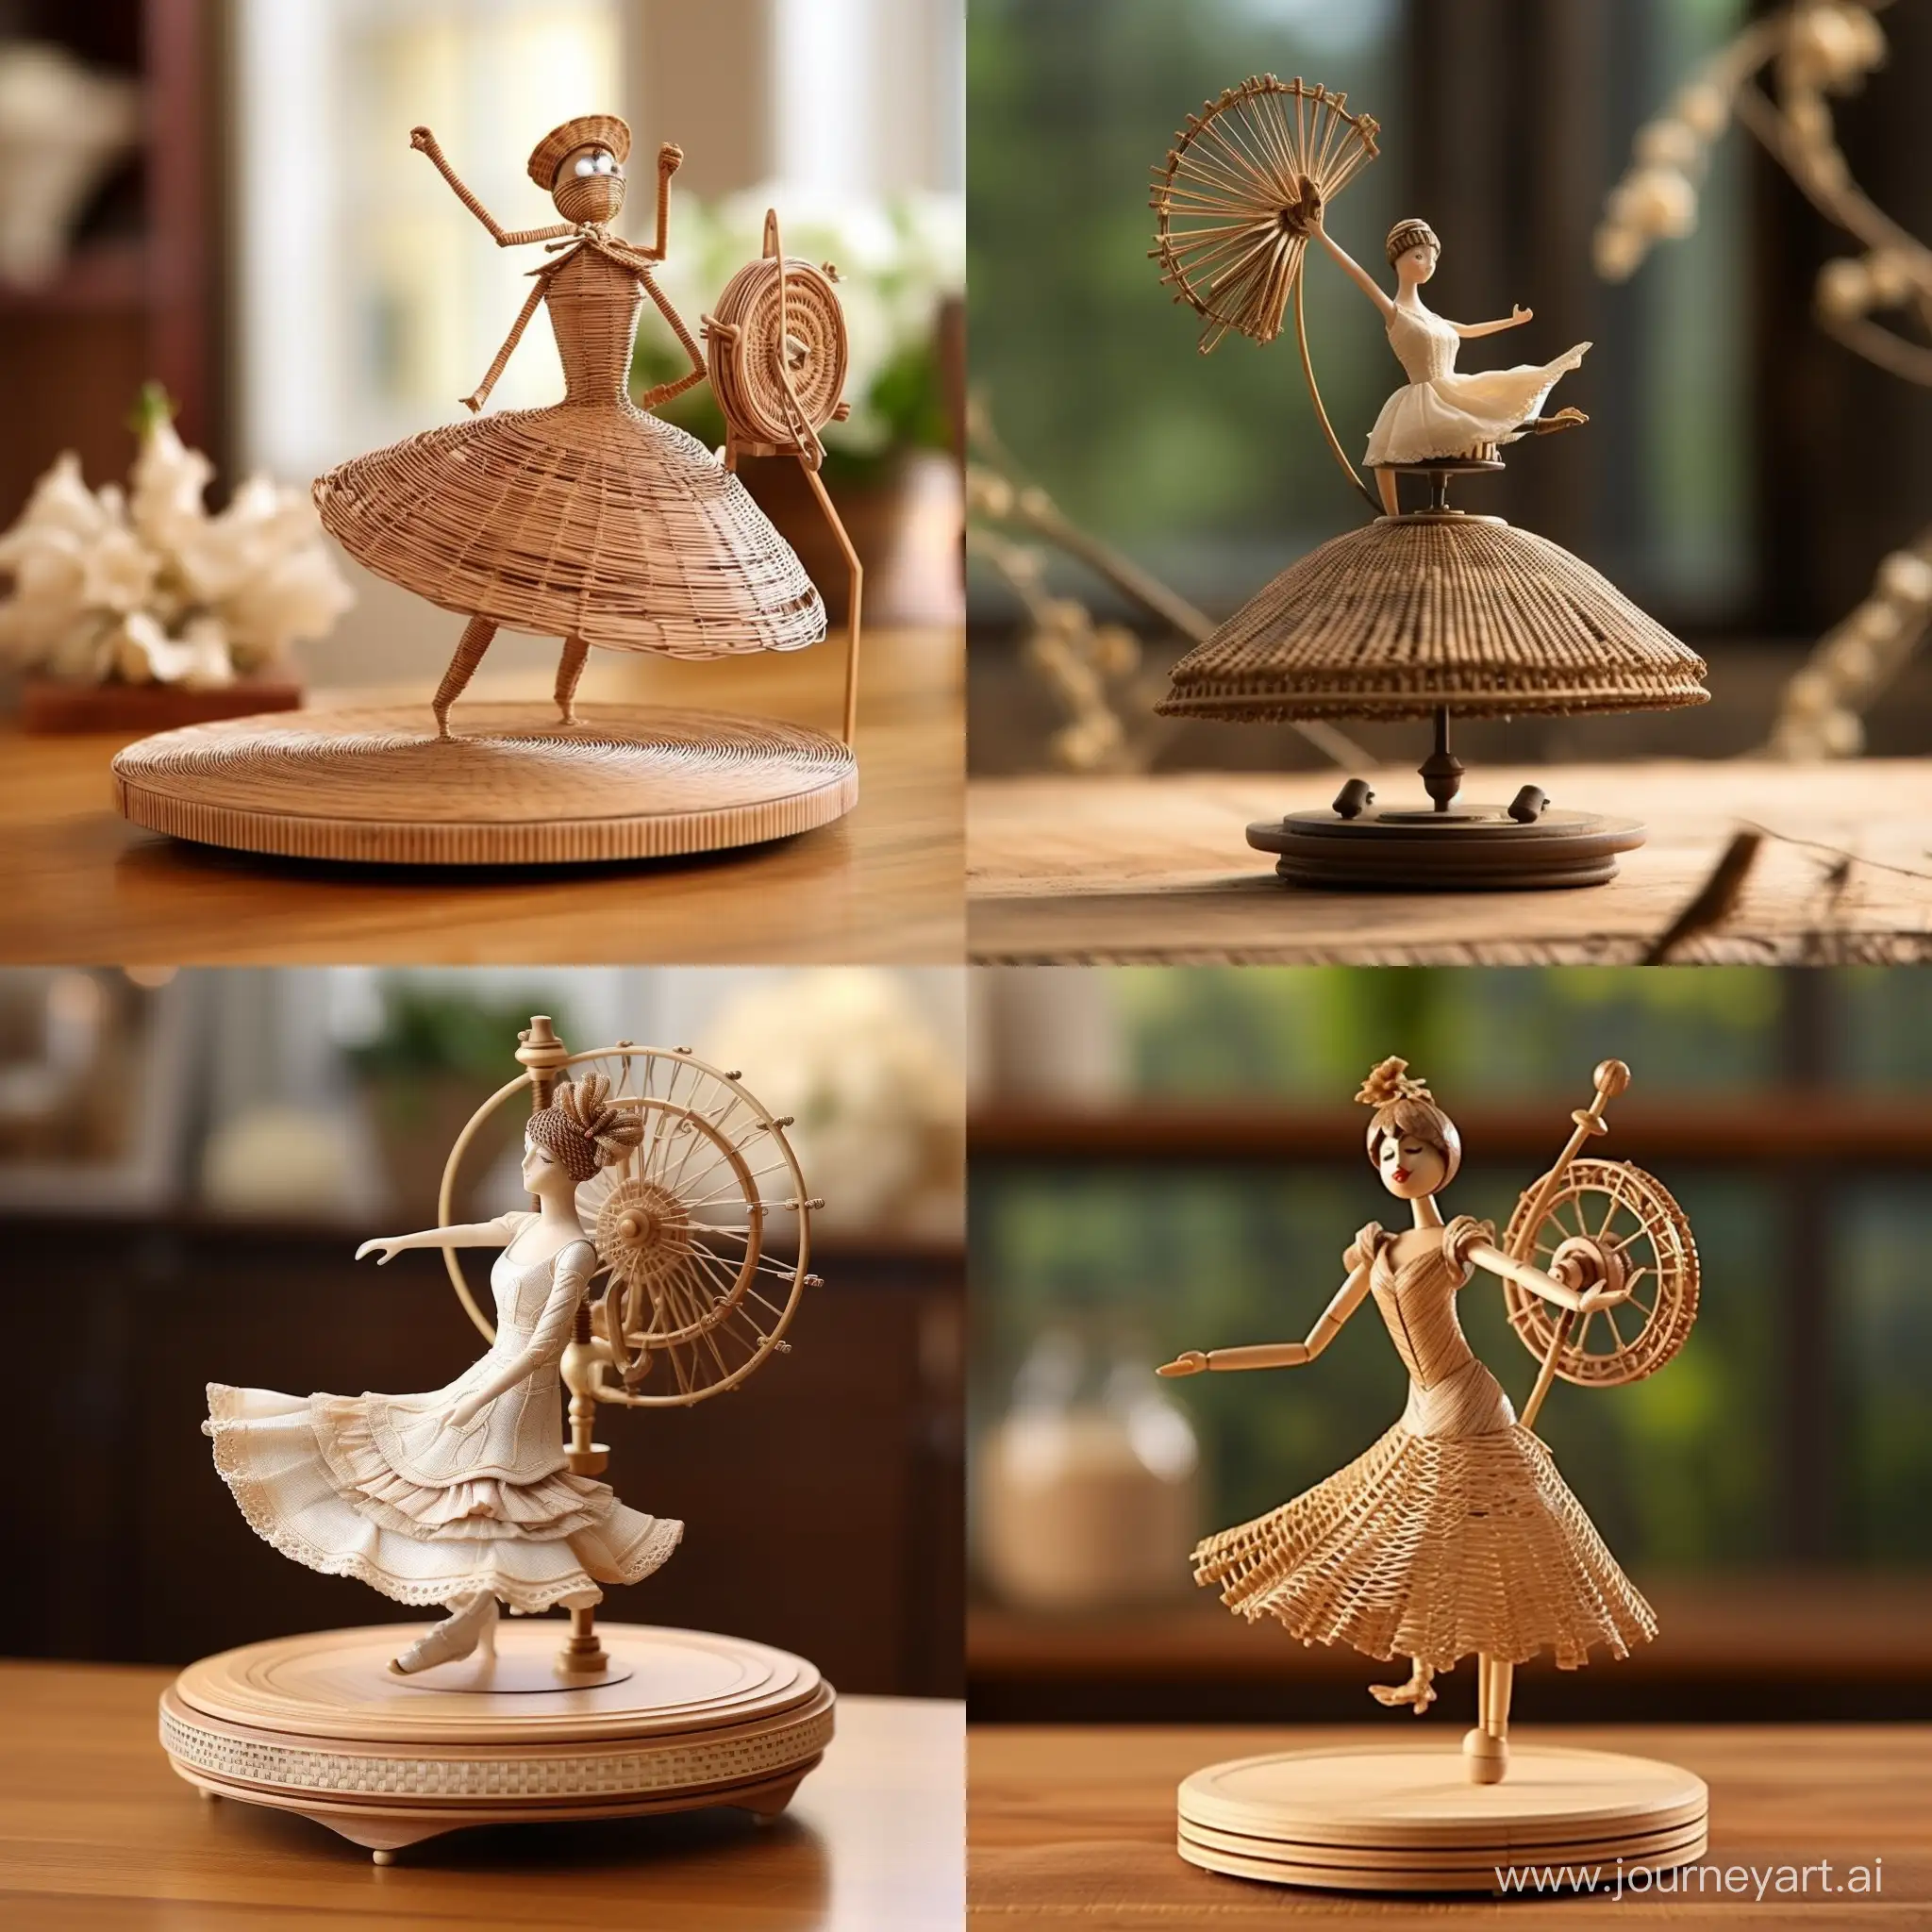 A rattan wind-up ballerina, elegantly designed, that spins gracefully on a small base, with wind-up gears, showing the wind-upmechanism.